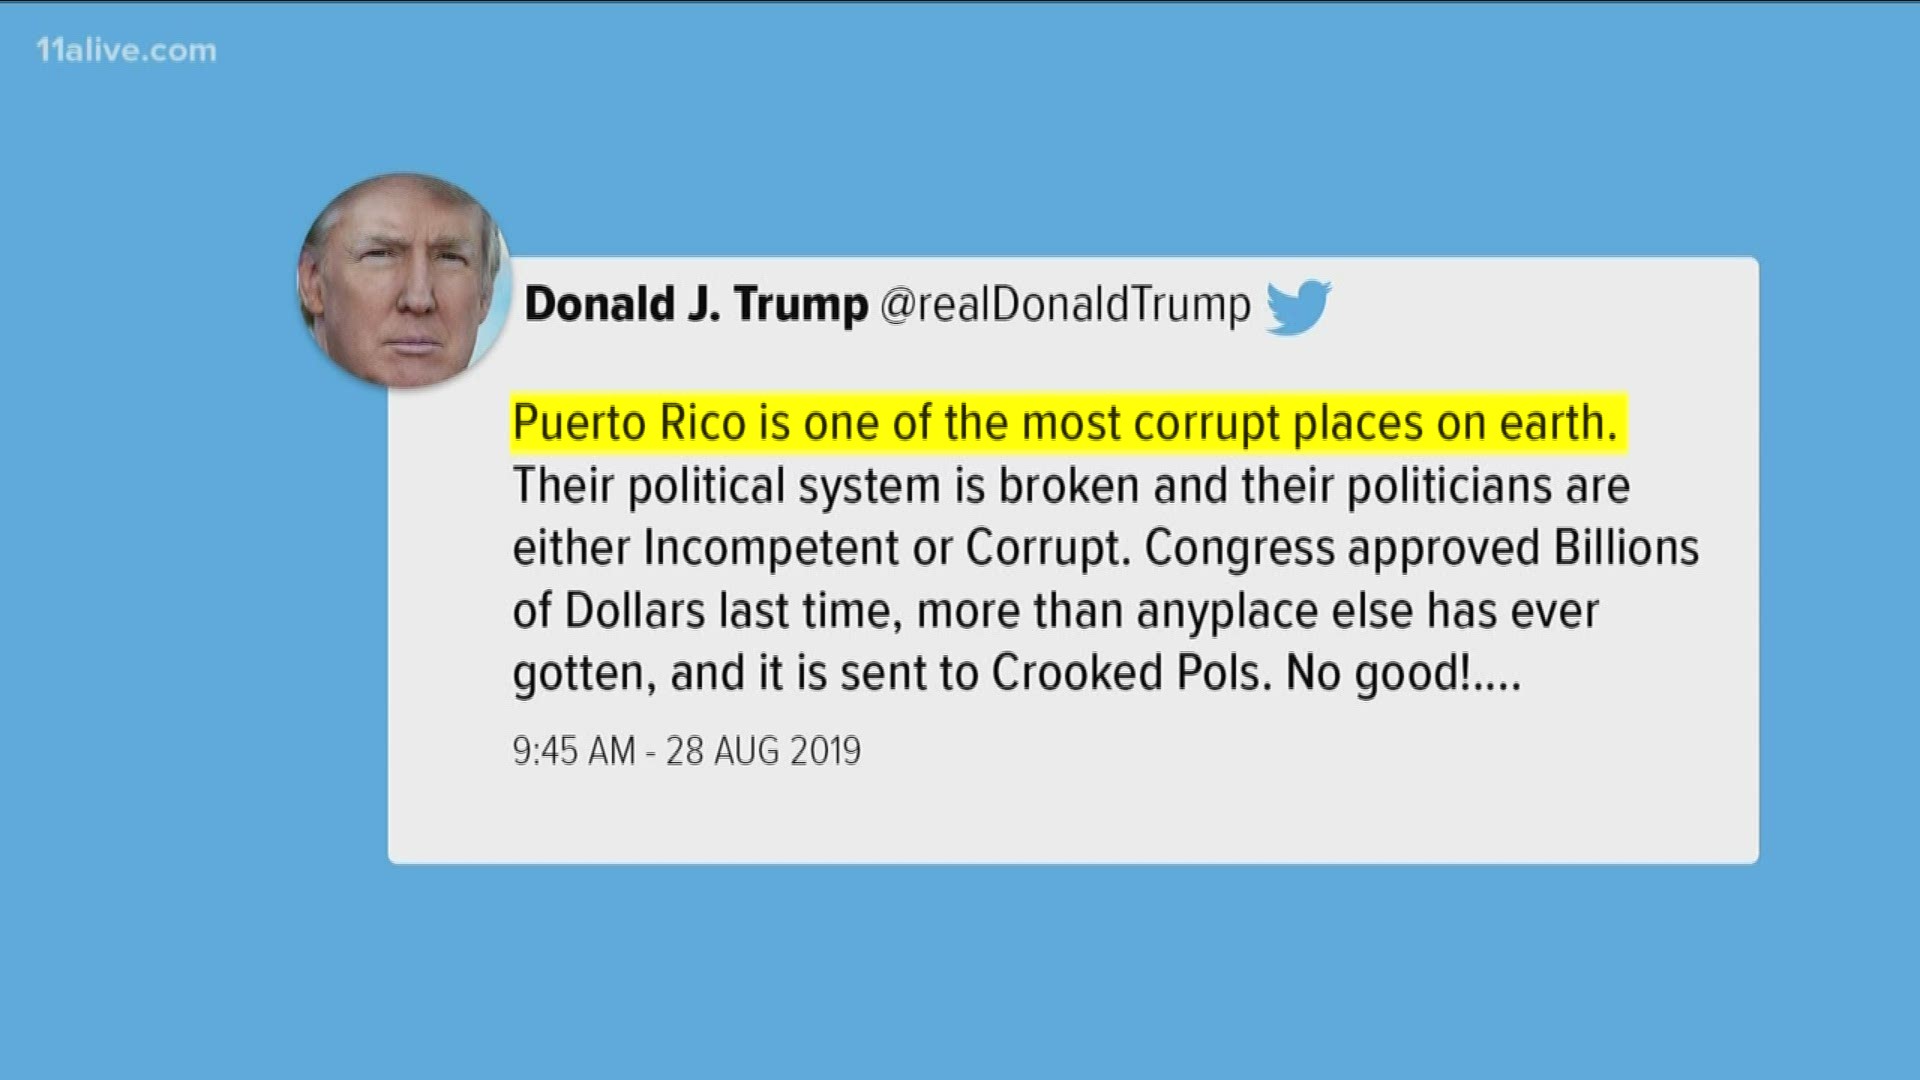 President Donald Trump created a hurricane of his own on Twitter after he slammed Puerto Rico as Hurricane Dorian threatened the island.